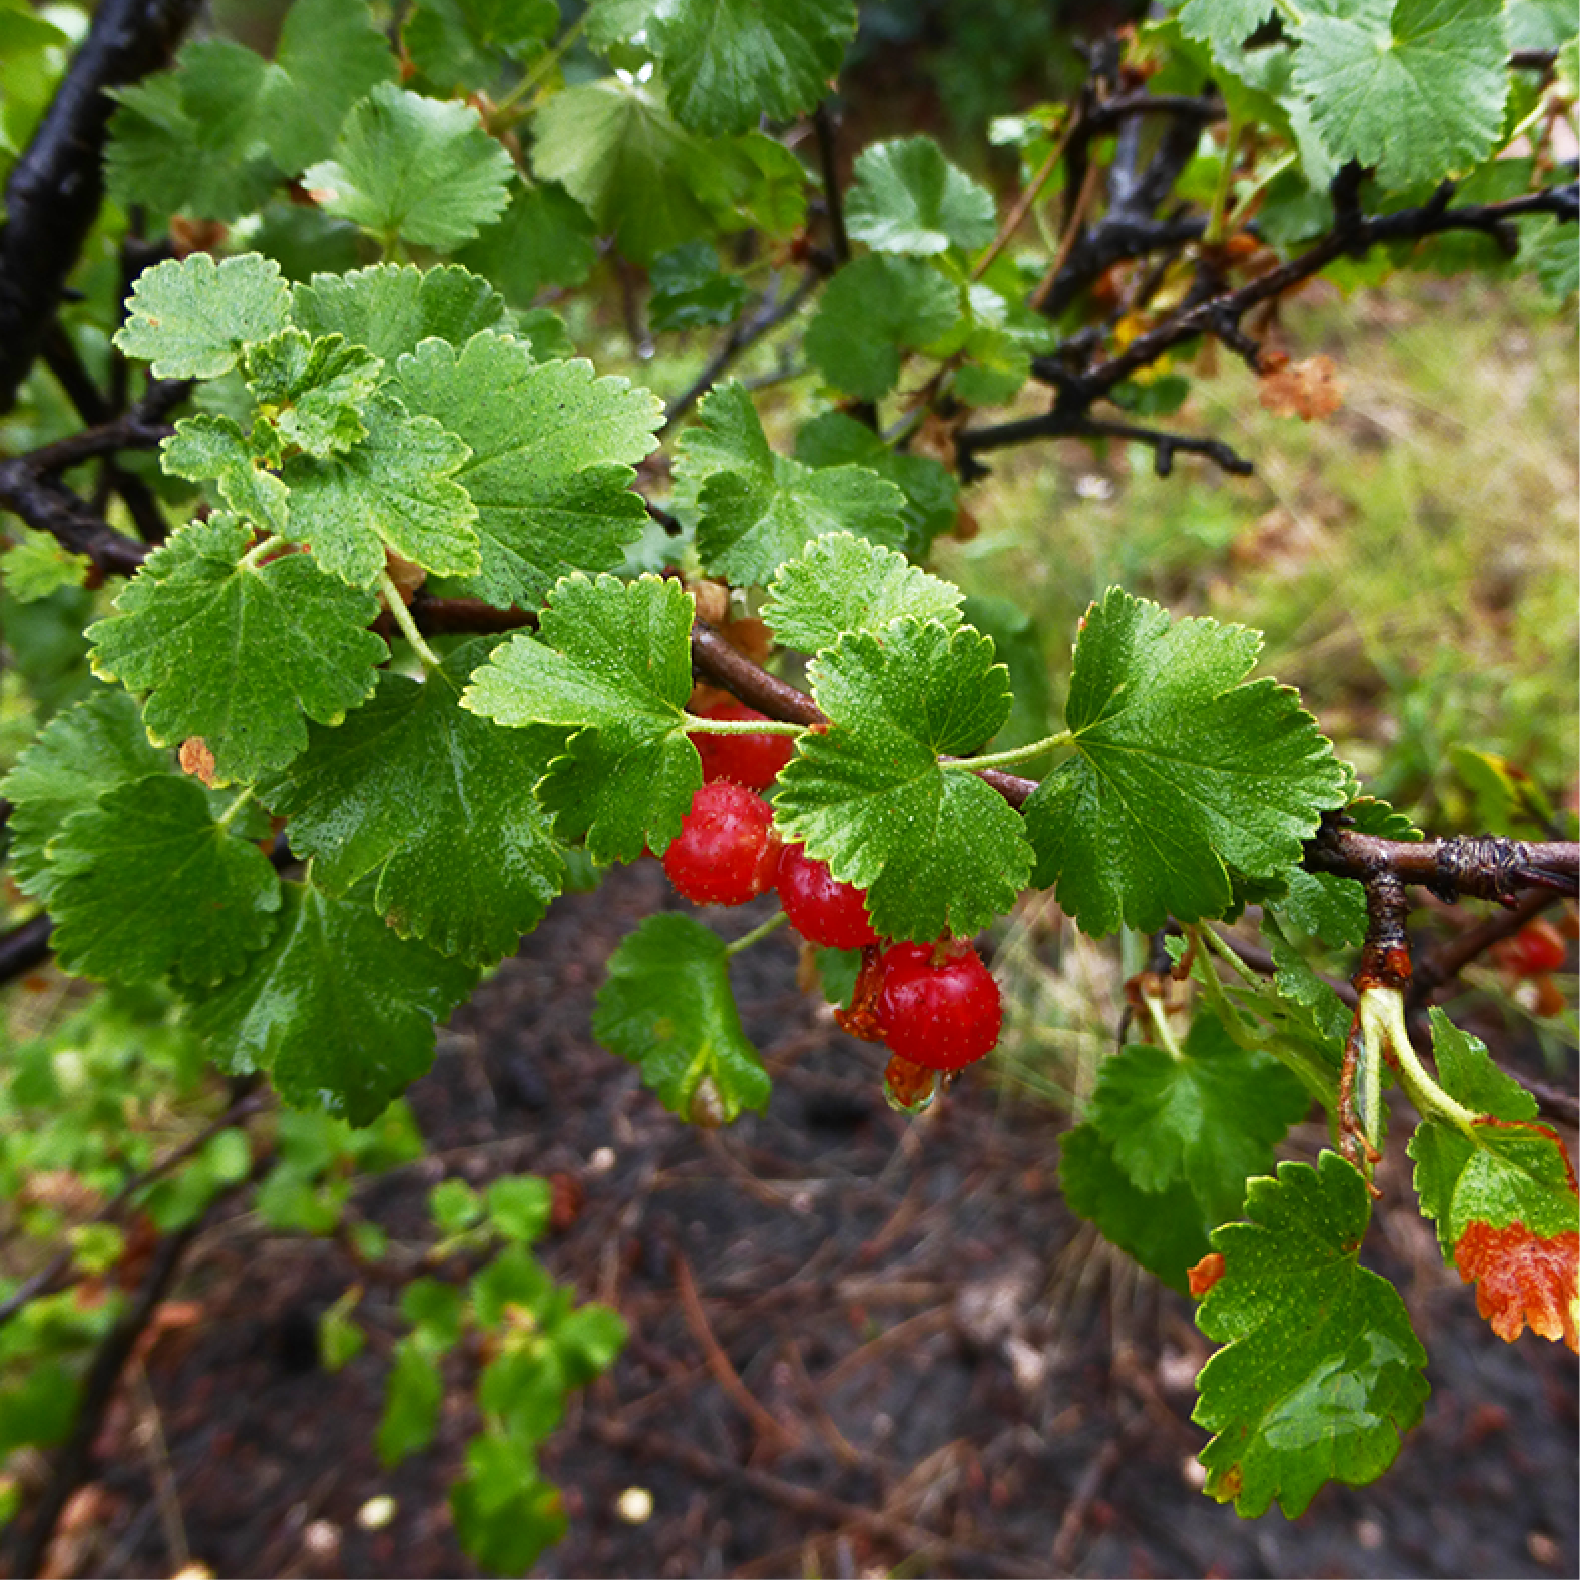 Round red berries half hidden by fin-shaped leaves.